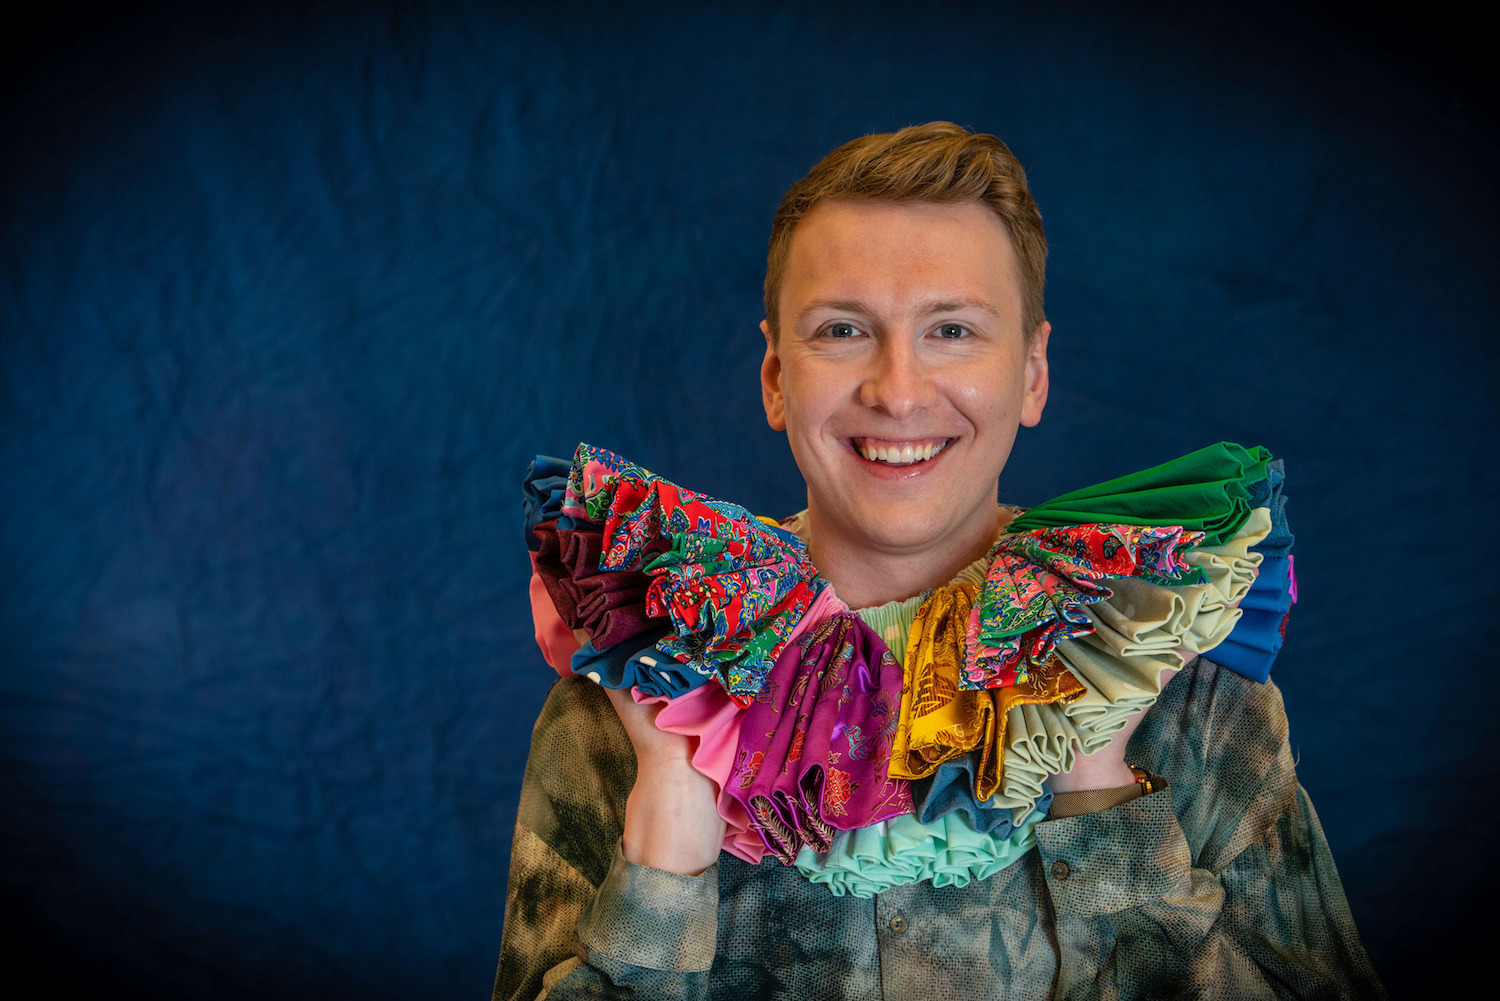 Joe Lycett has an interesting idea on how to get the hospitality trade back on its feet